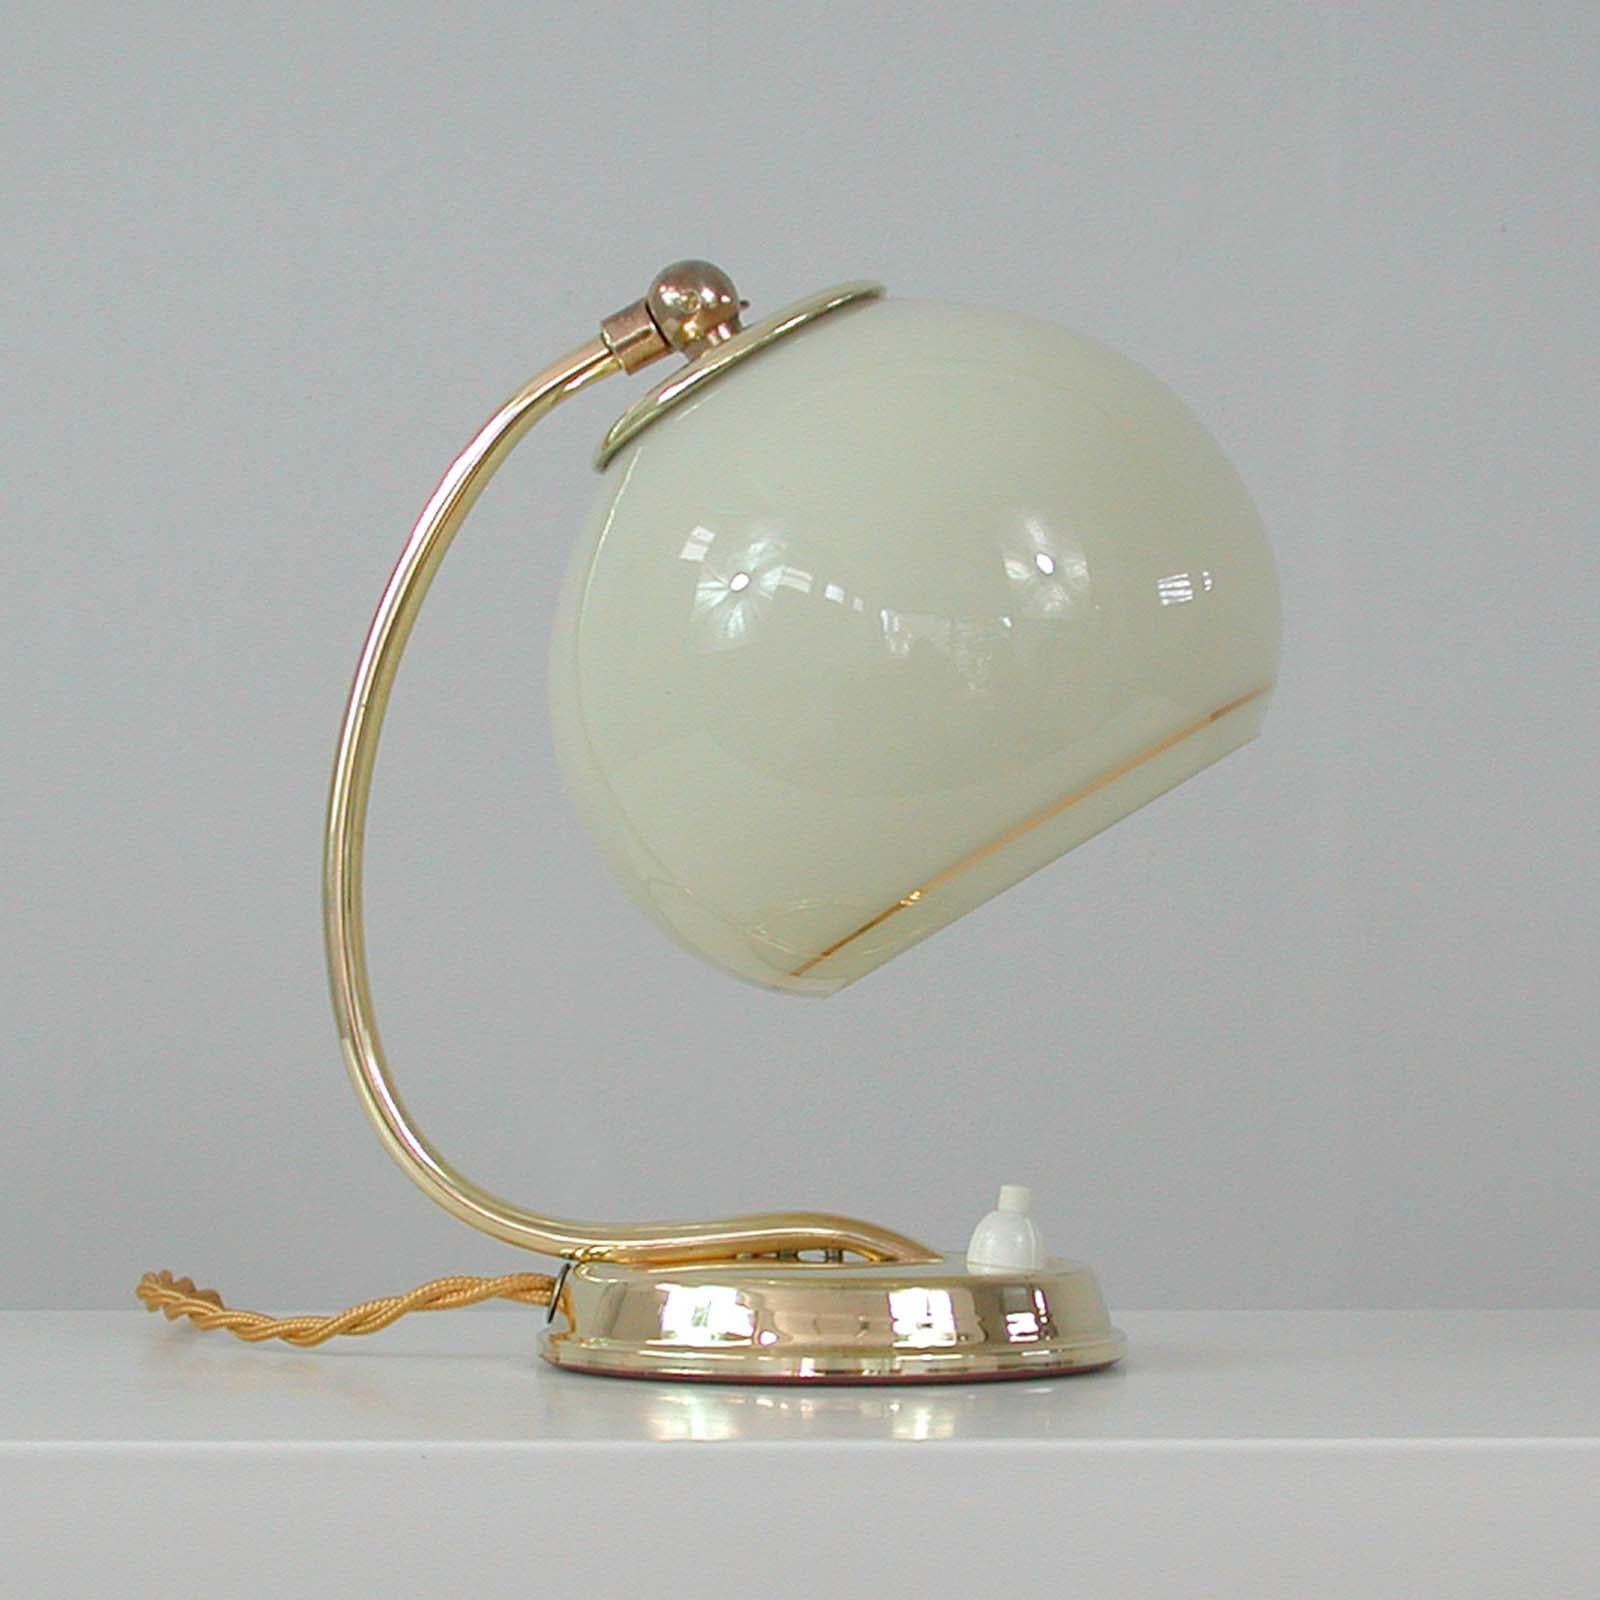 This awesome vintage table or bedside lamp was made in Germany in the 1930s during the Art Deco period. It is made of brass and has got an adjustable lamp shade in cream opaline glass with gilt decoration.

Rewired with gilt colored silk cord and